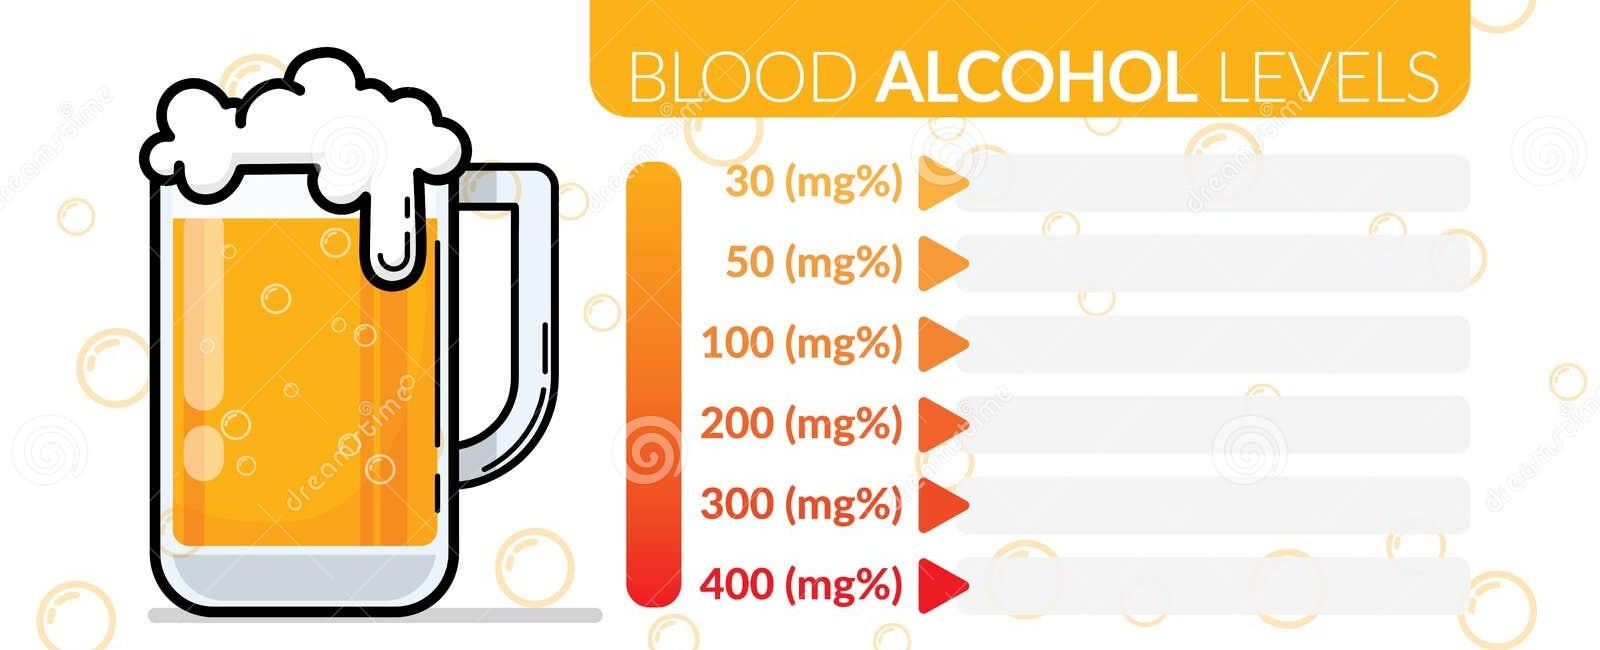 After the human body is awake for 16 hours it decreases in performance in the same way it would if its blood alcohol level were 05